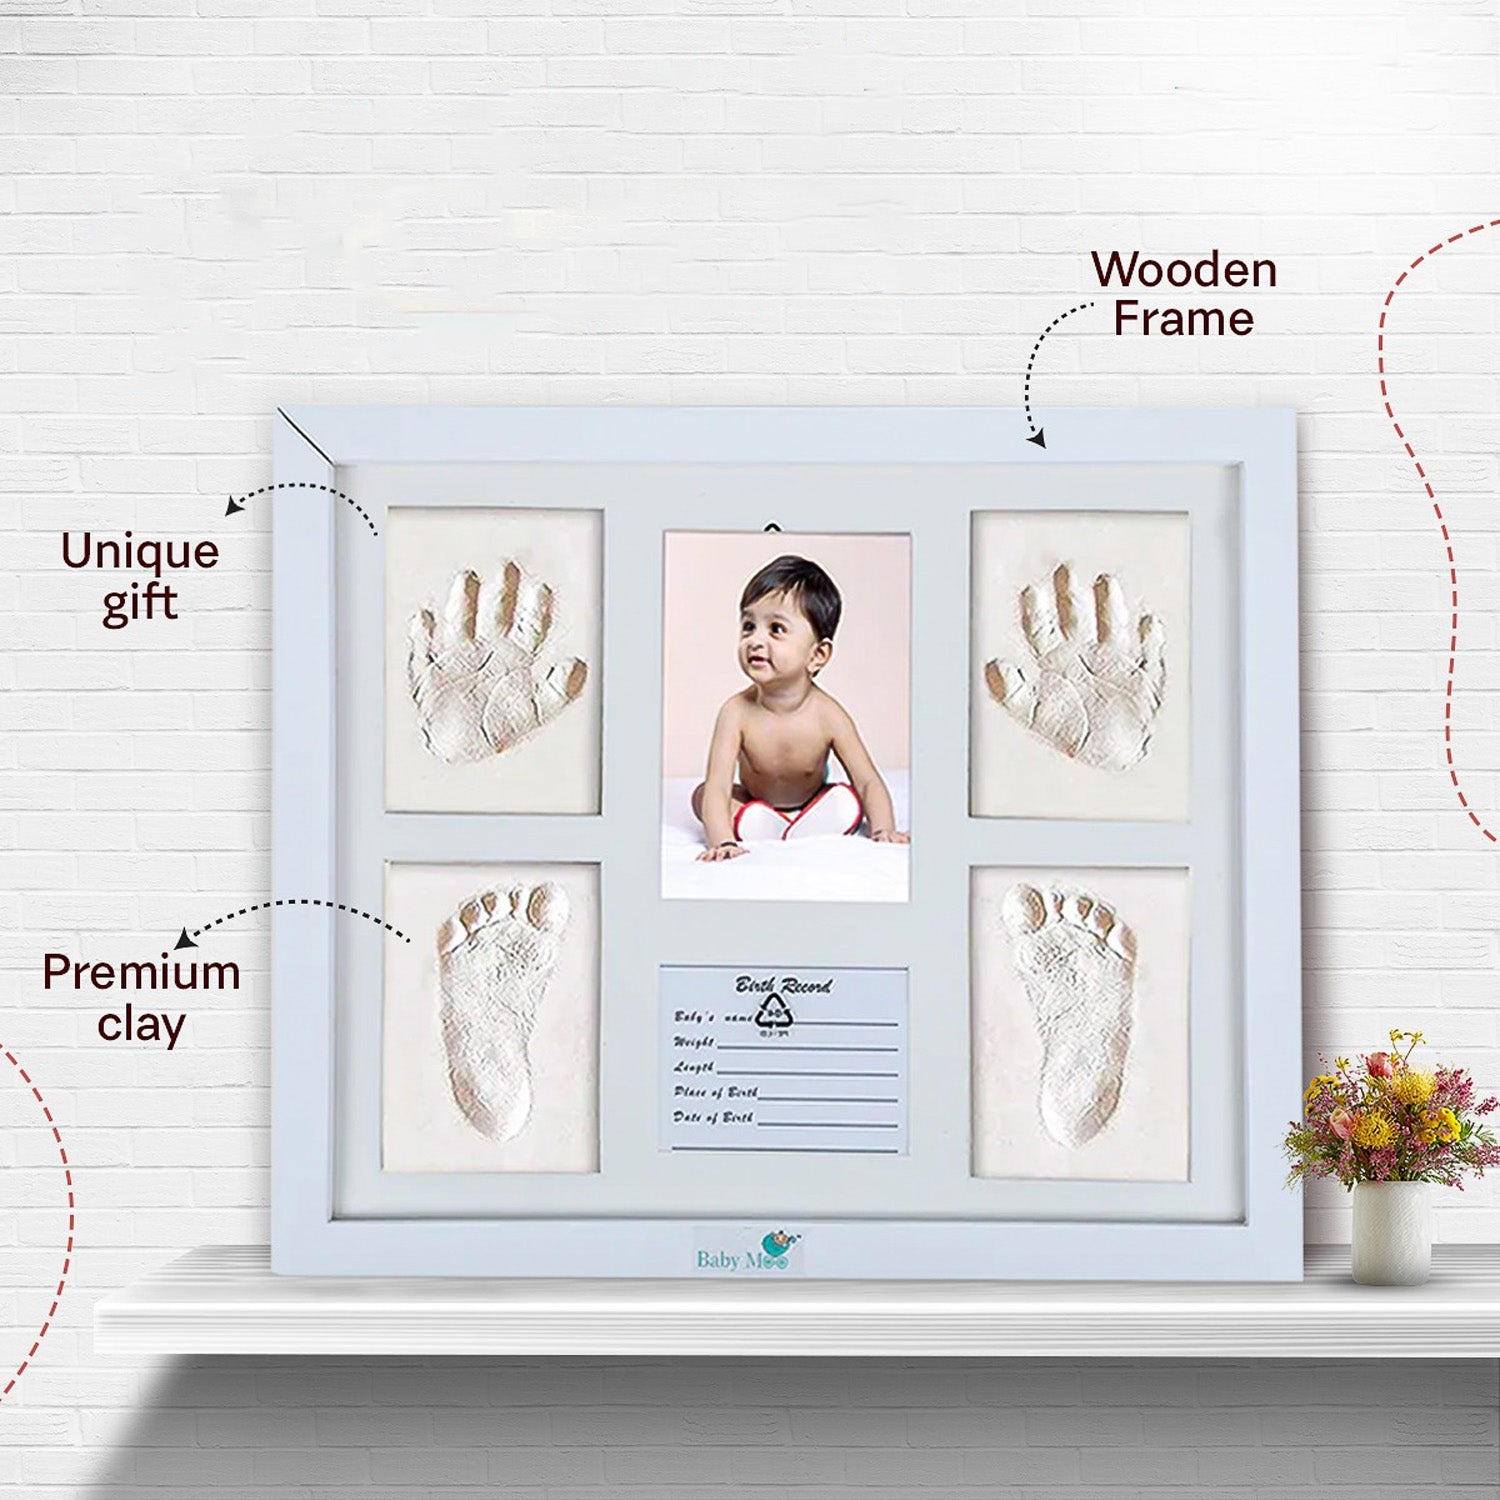 Baby Moo Clay Handprint And Footprint Impression Wooden Photo Frame For Infant Memories - White